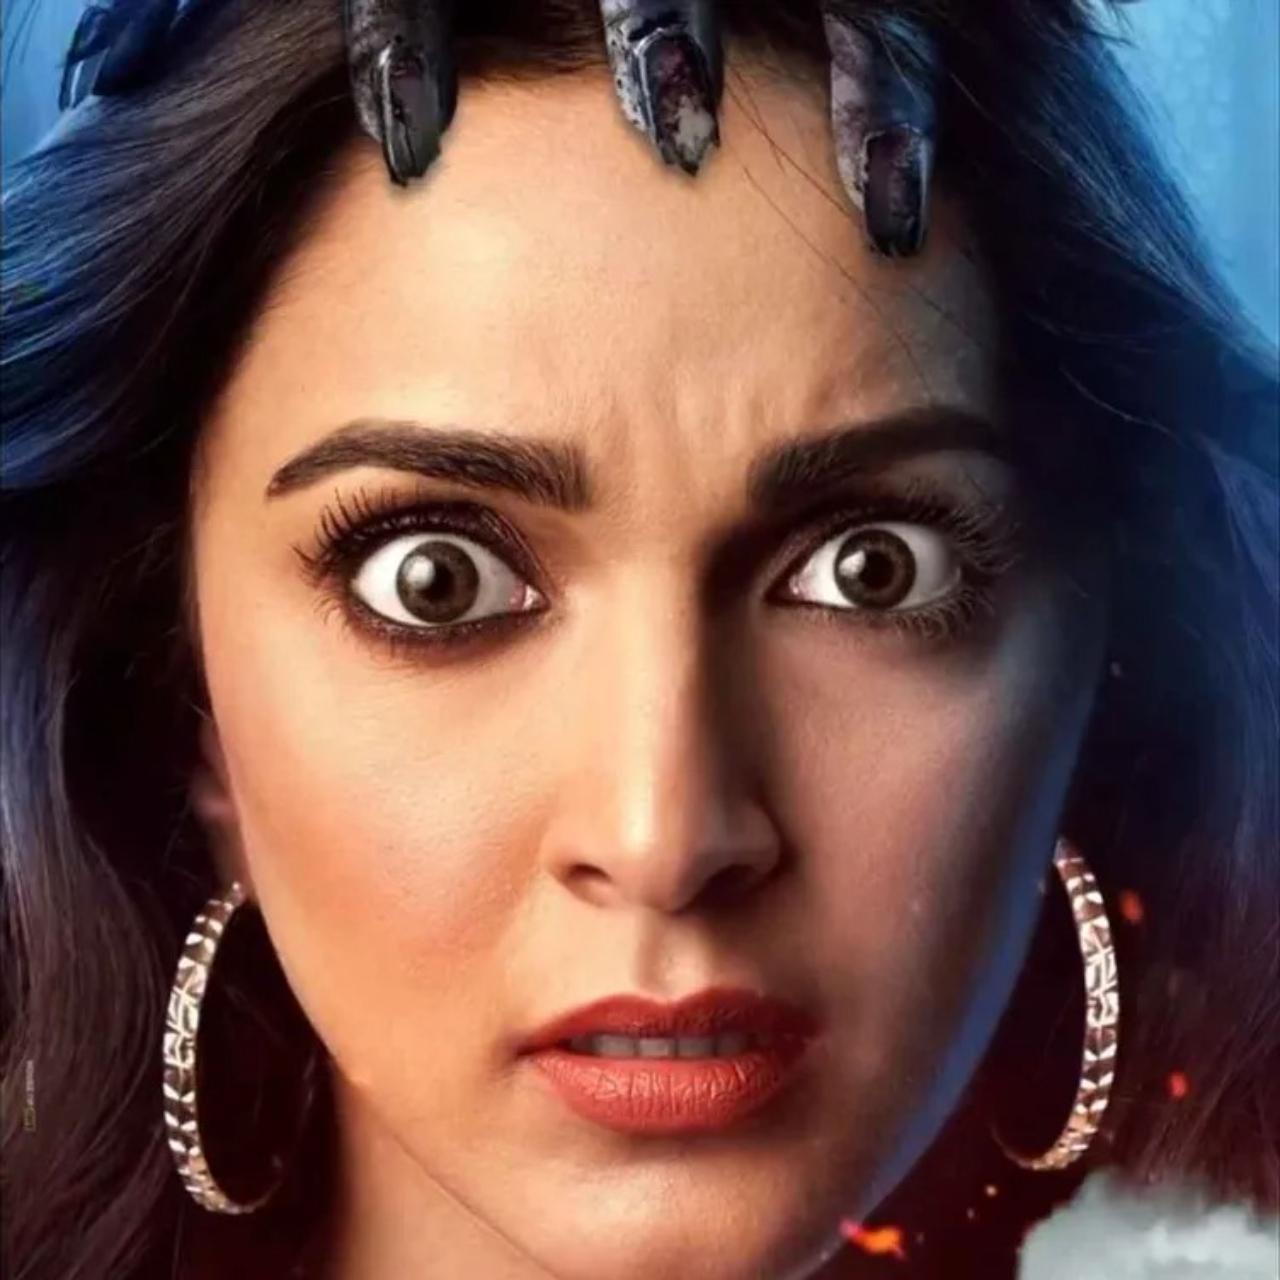 Bhool Bhulaiyaa 2
Directed by Anees Bazmee, the film marks Kiara's second horror comedy film after 'Laxmii'. Along with her the film also starred Kartik Aryan and Tabu in prominent roles. The 'Lust stories' actor portrayed the role of young girl Reet Thakur who fakes her death in front of her family and later falls into a horror maze. The film gathered positive responses from the netizens and collected over Rs 270 crores at the box office post covid